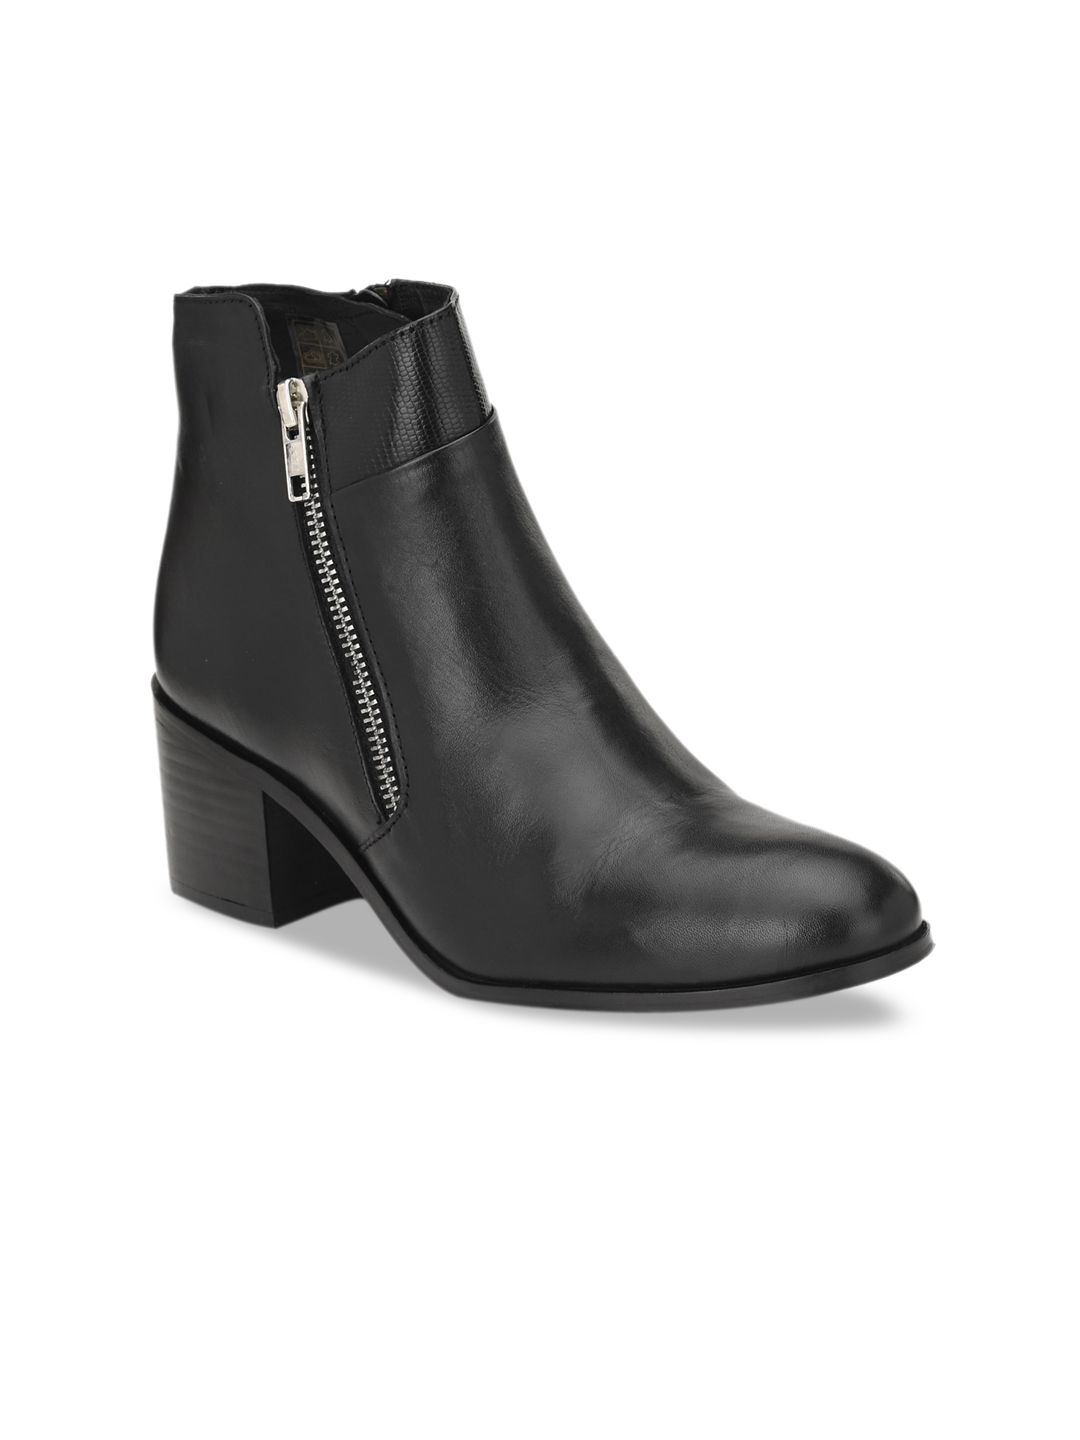 Delize Women Black Solid Faux Leather Heeled chelsea Boots Price in India